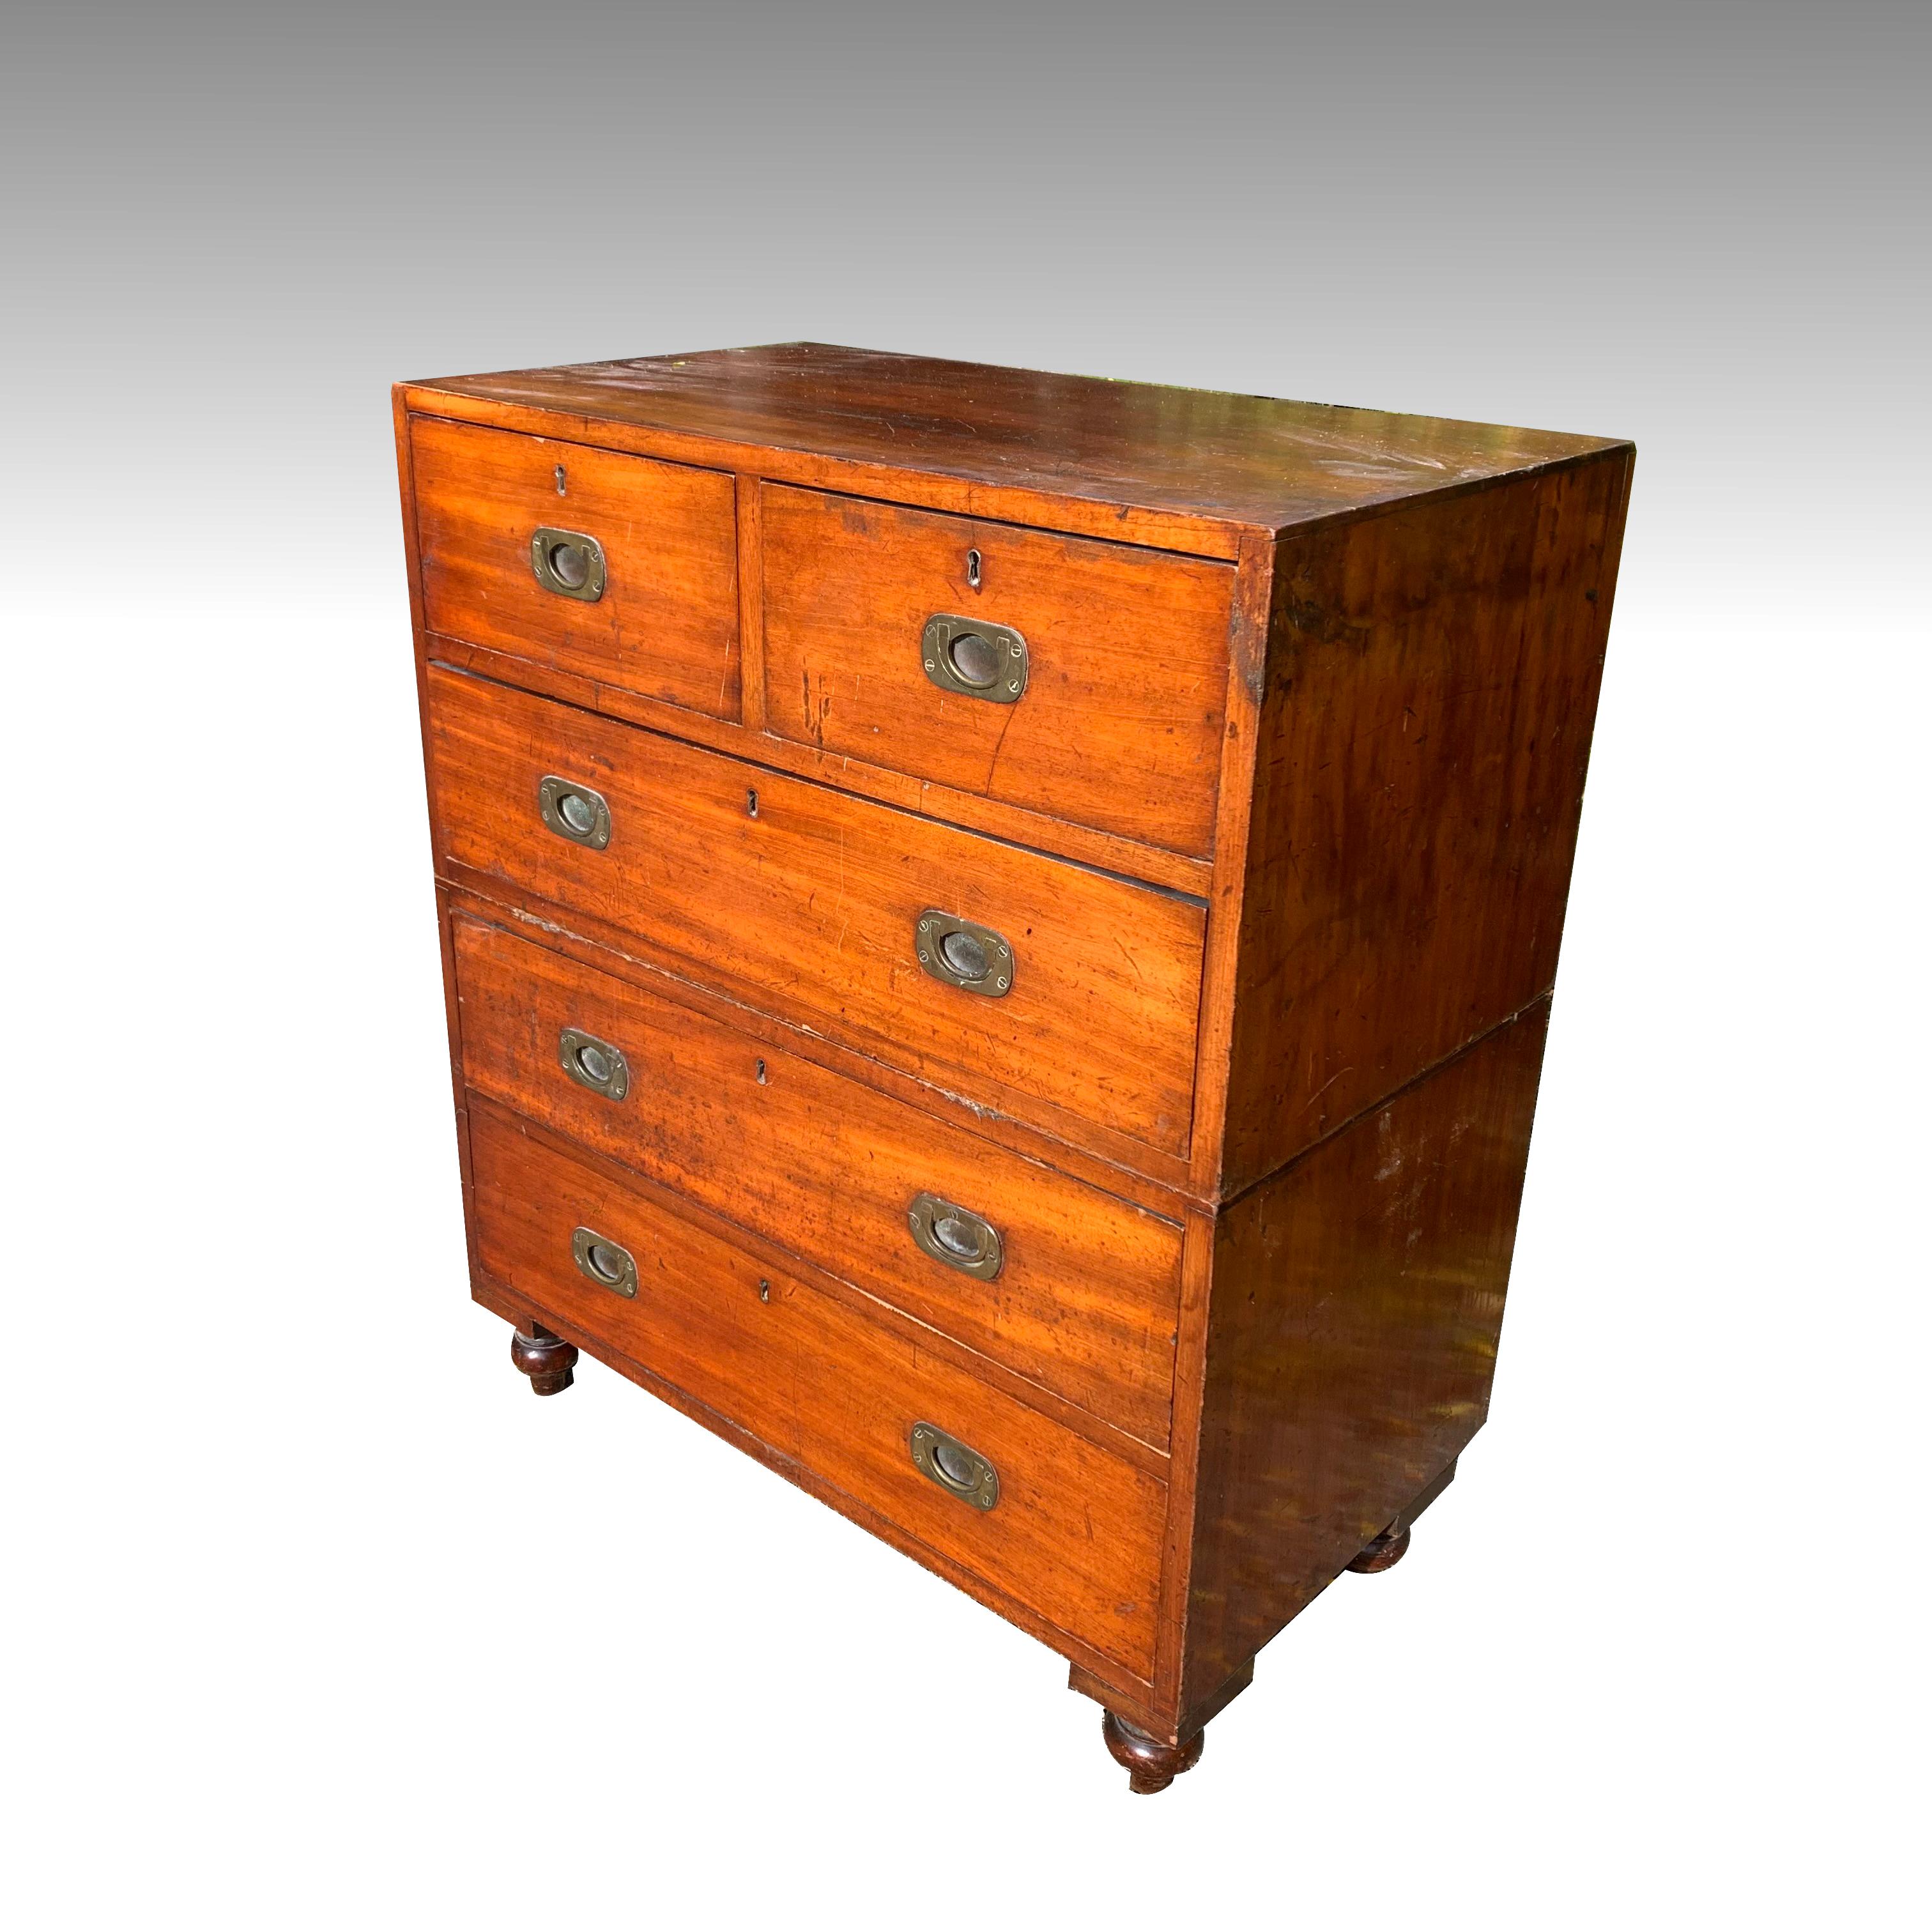 A fine example of an early 19th century teak military or campaigne chest of drawers. Smaller than average at just 34 inches wide, in two parts.
This fine piece is in excellent, original 'Country House condition' with the odd scuff, bruise, dent and